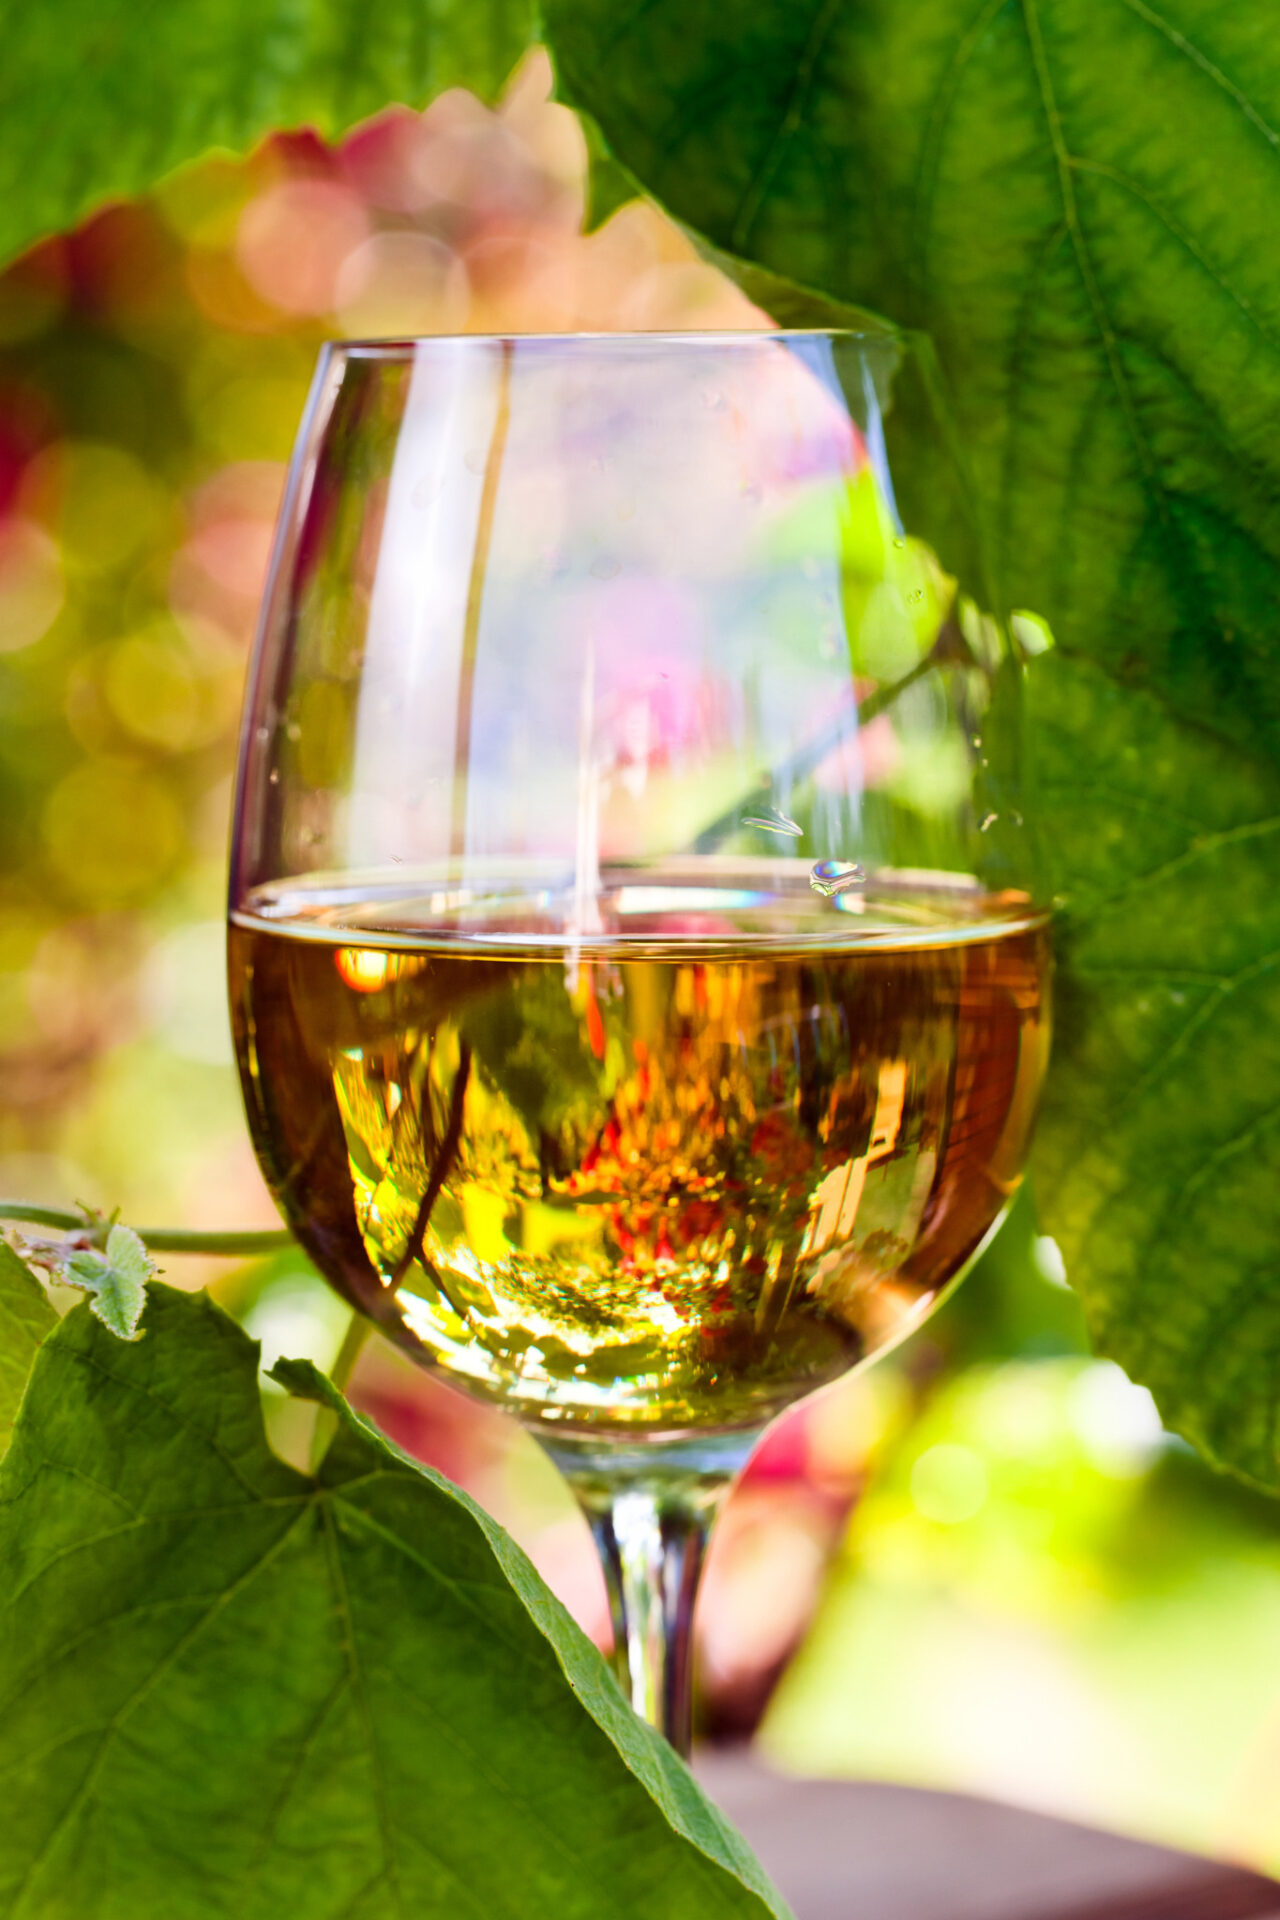 A glass of Chardonnay surrounded by vines